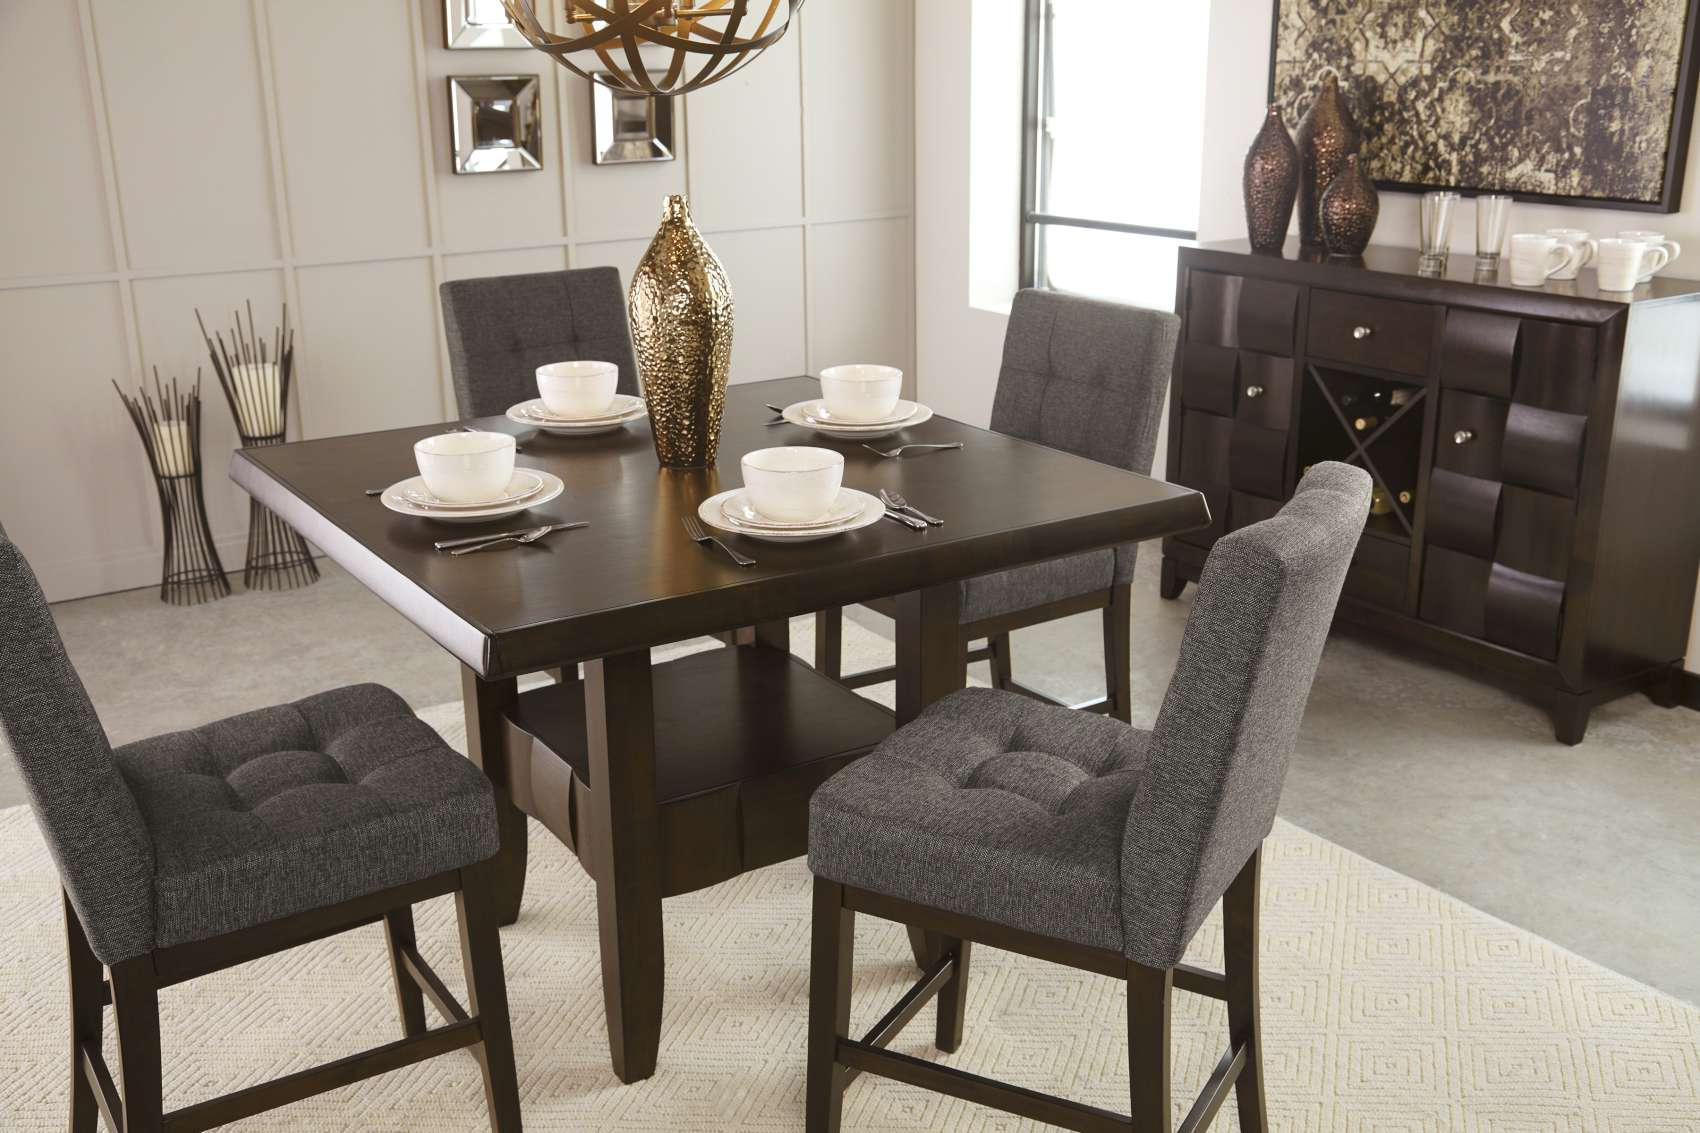 chanella dining room table price